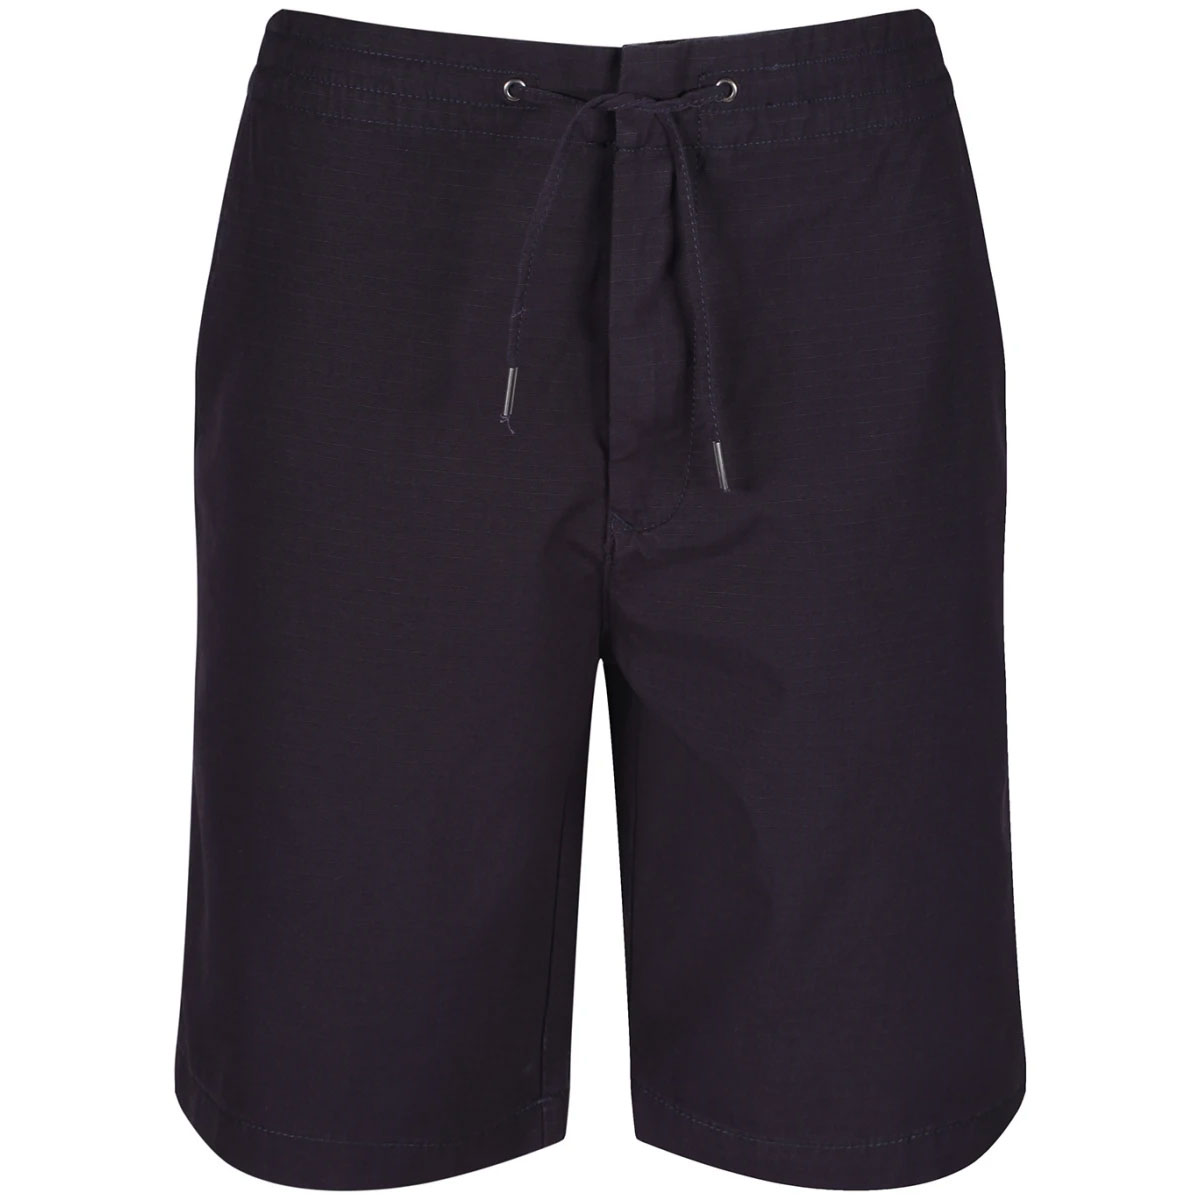 Barbour Bay Ripstop Shorts: Navy - Aston Bourne